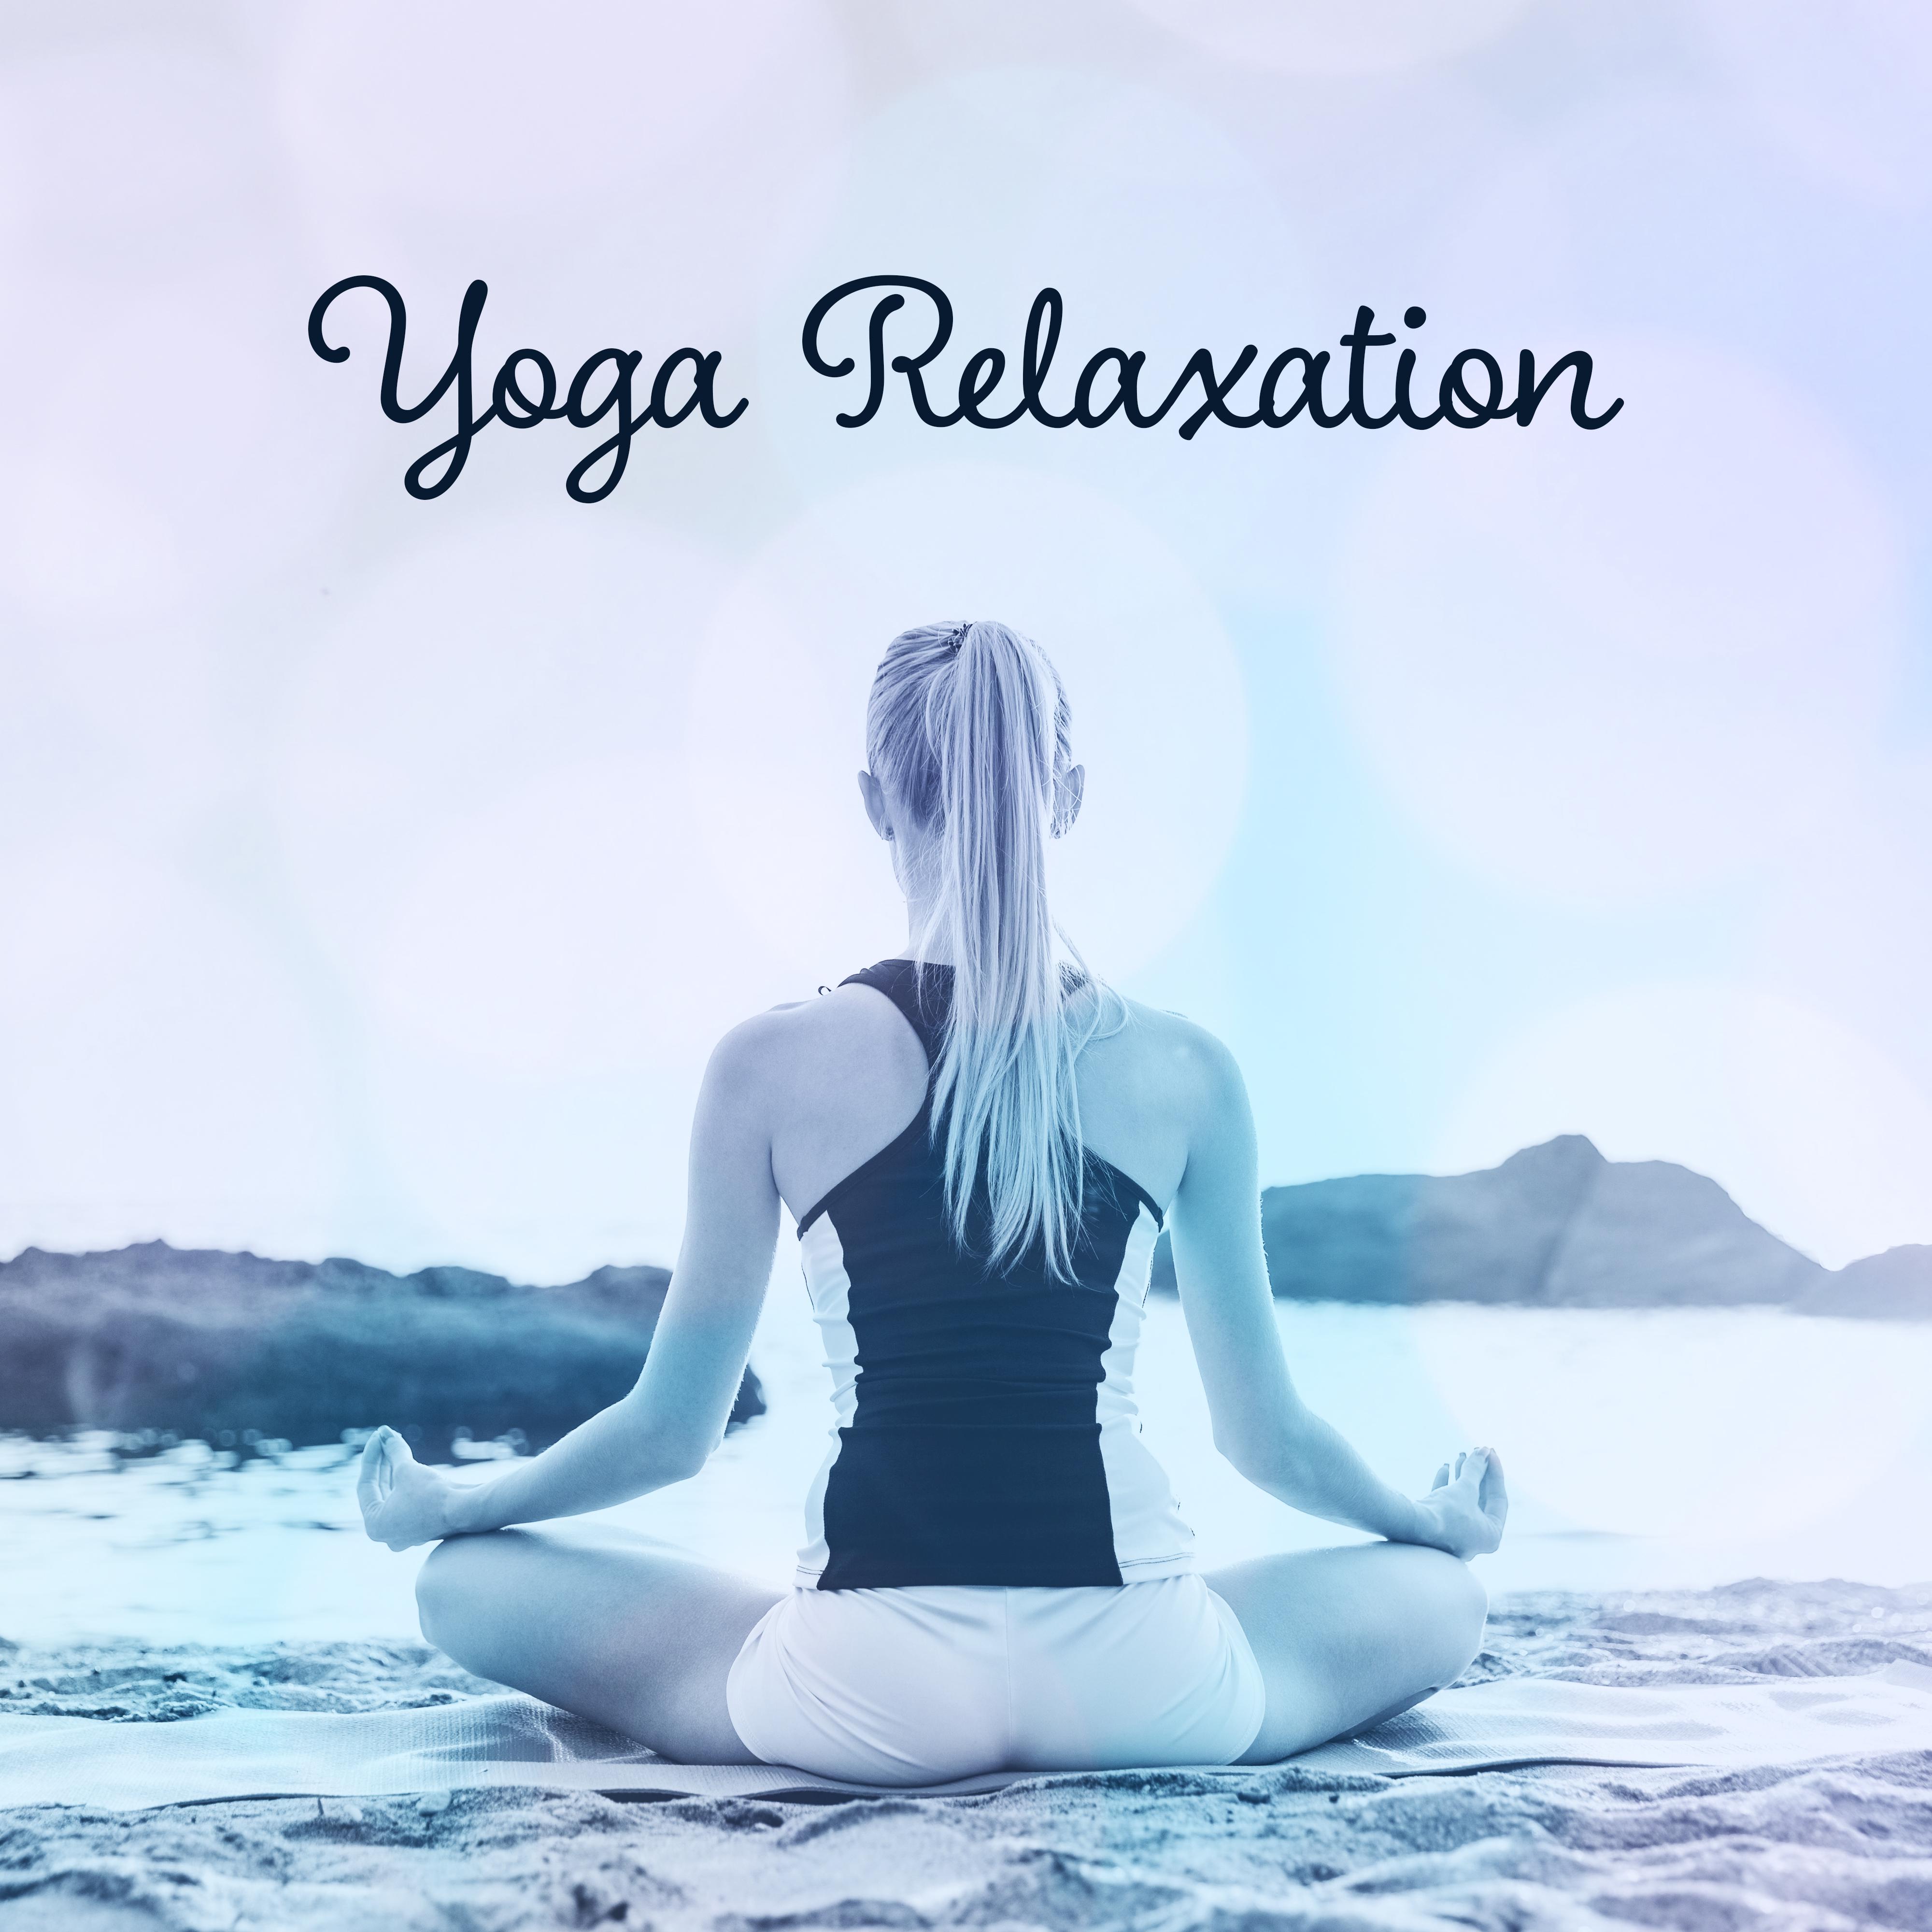 Yoga Relaxation  New Age Music, Nature Sounds, Yoga Background, Meditate, Rest